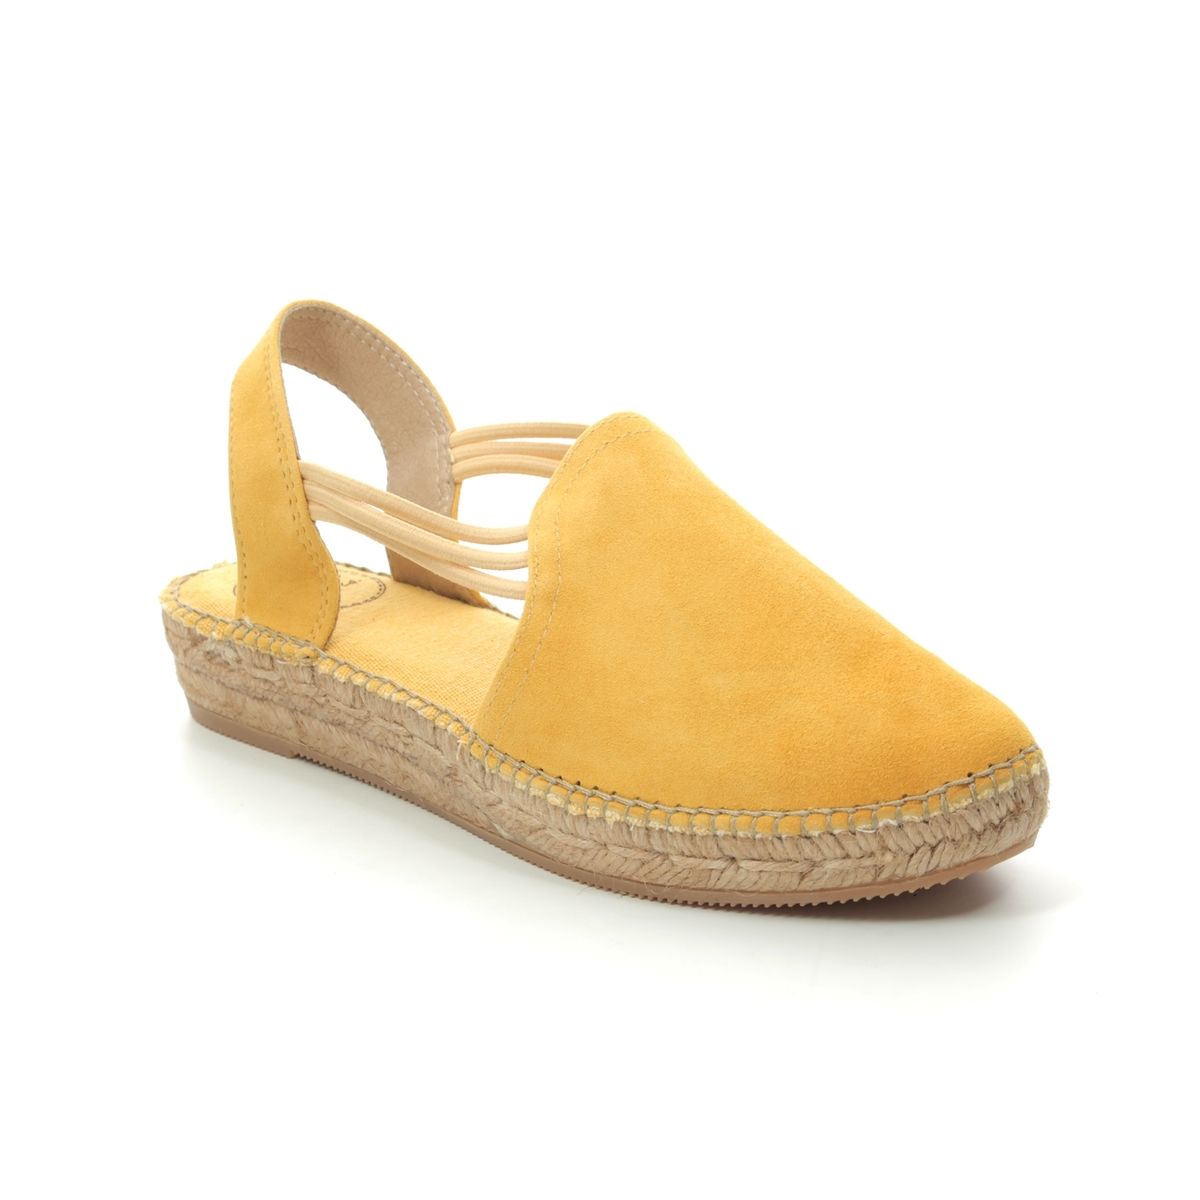 Toni Pons Nuria In Yellow Suede 0110-08 In Size 37 In Plain Yellow Suede